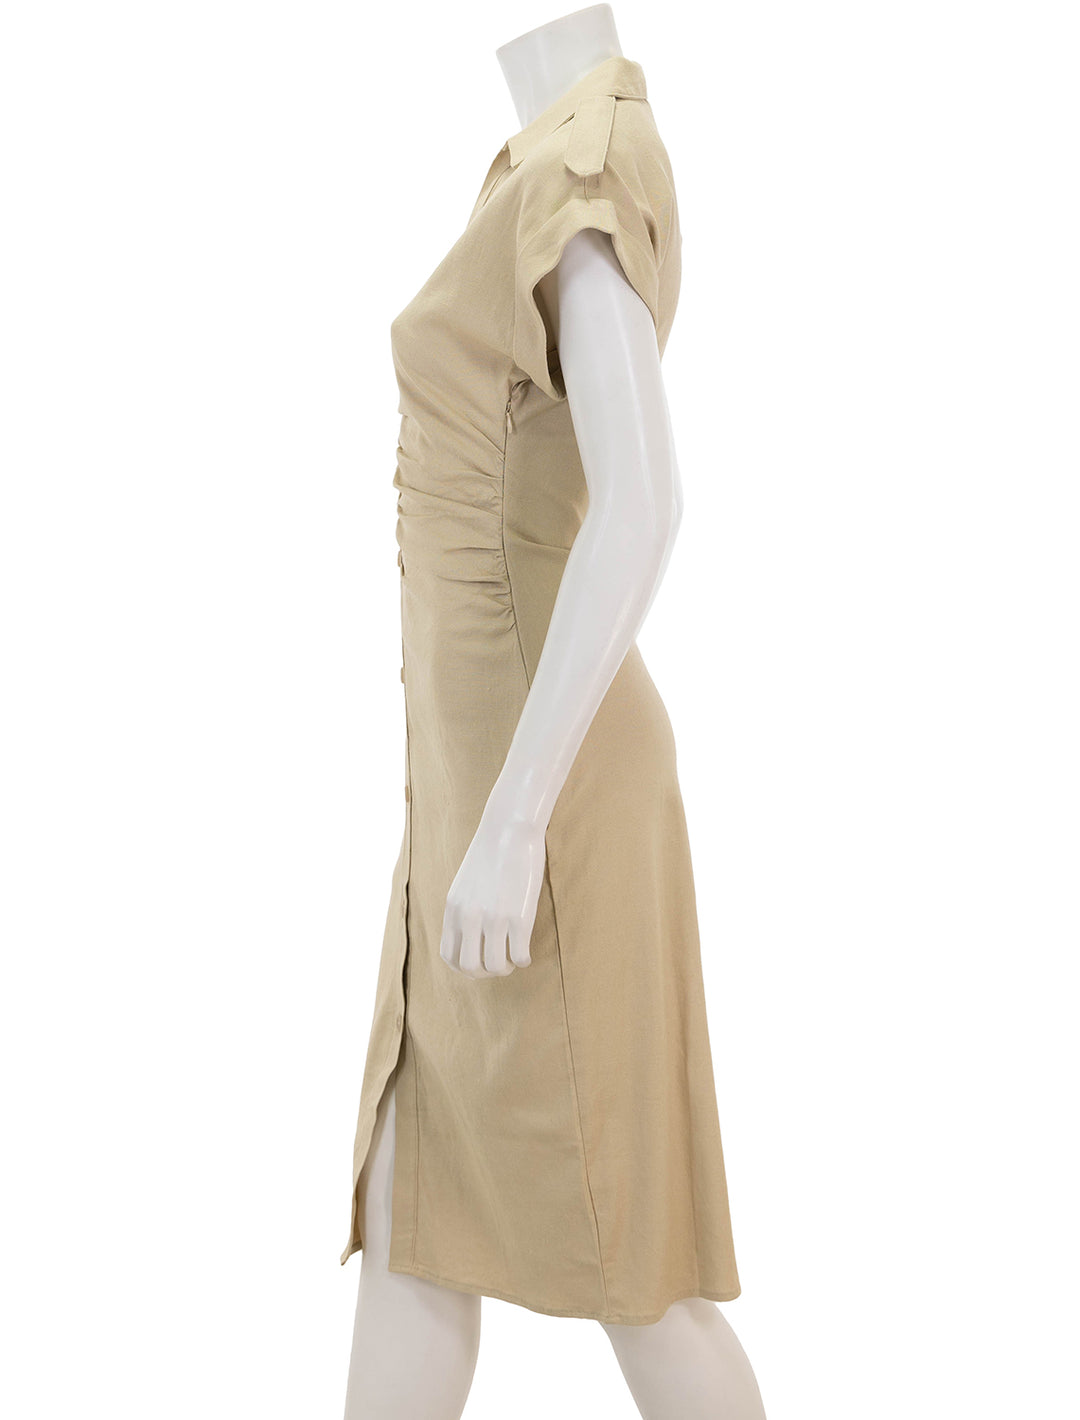 Side view of Steve Madden's cambrie dress in wood thrush.